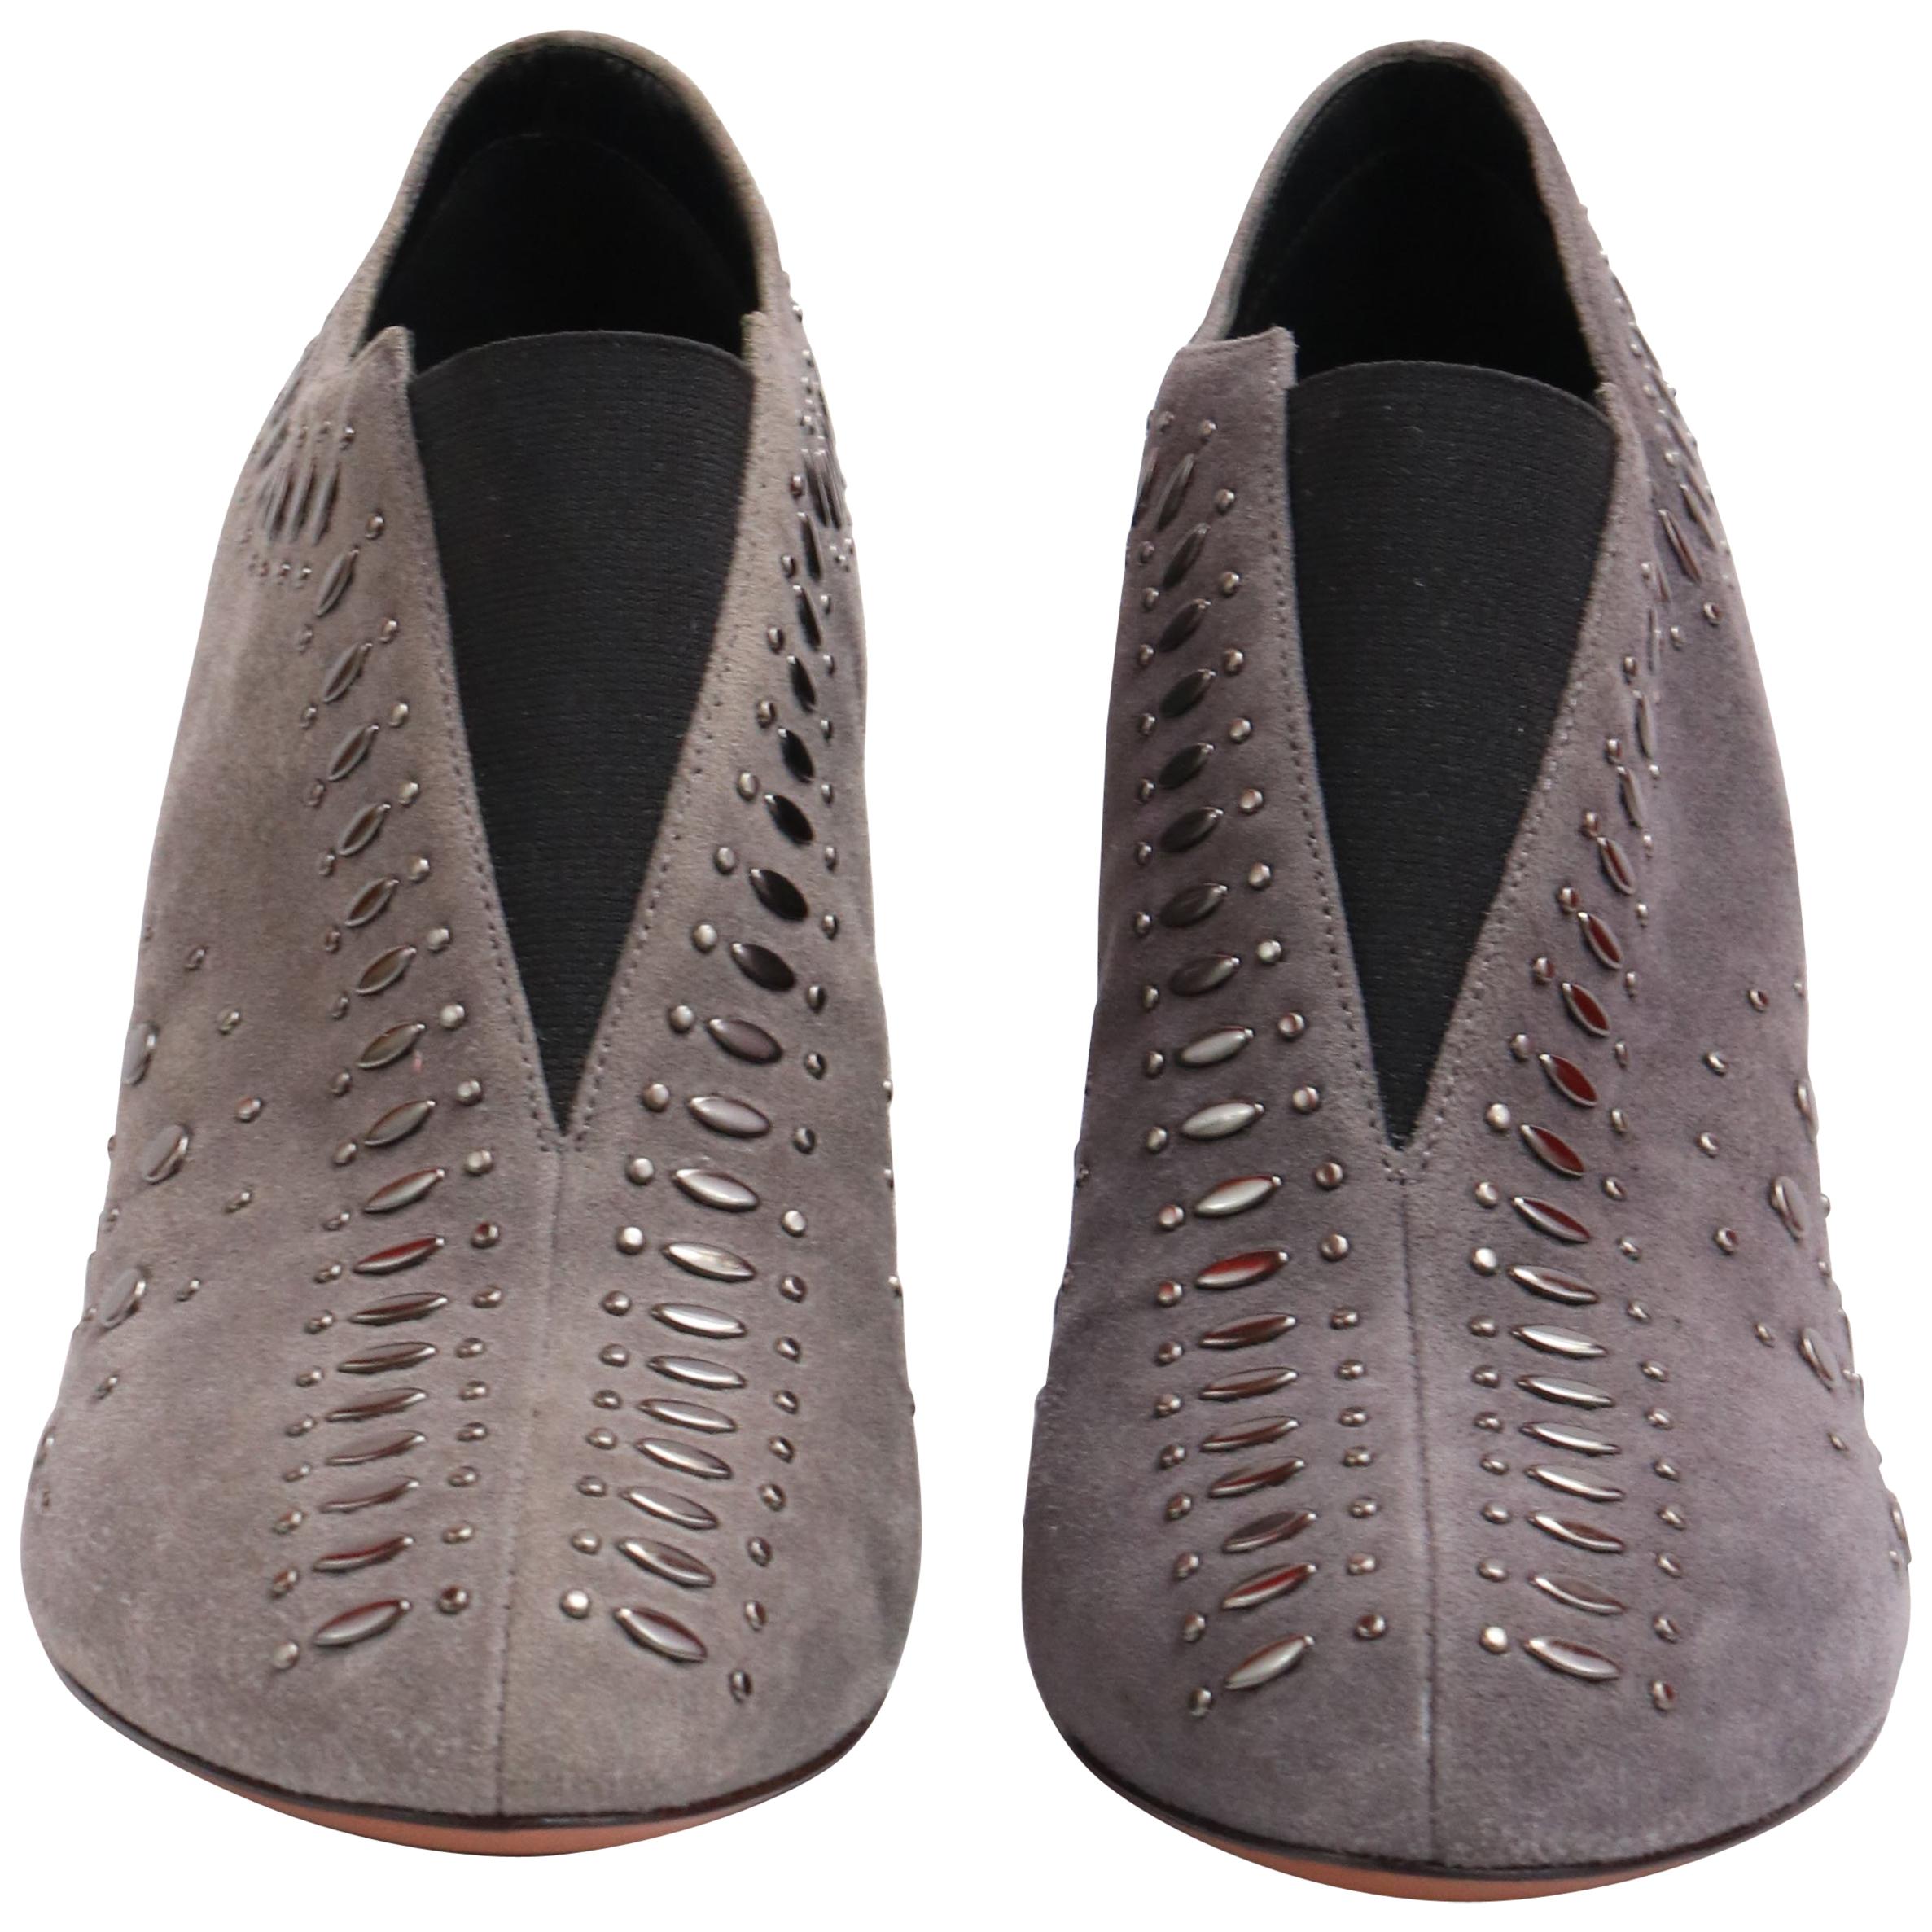 These pair of ALAIA heels are the perfect winter shoes! Made with grey suede and an intricate studded design. 
Would look great with any casual daytime look or classy night look. 
NBW
Comes with original shoebox that has an amazing leather strap and